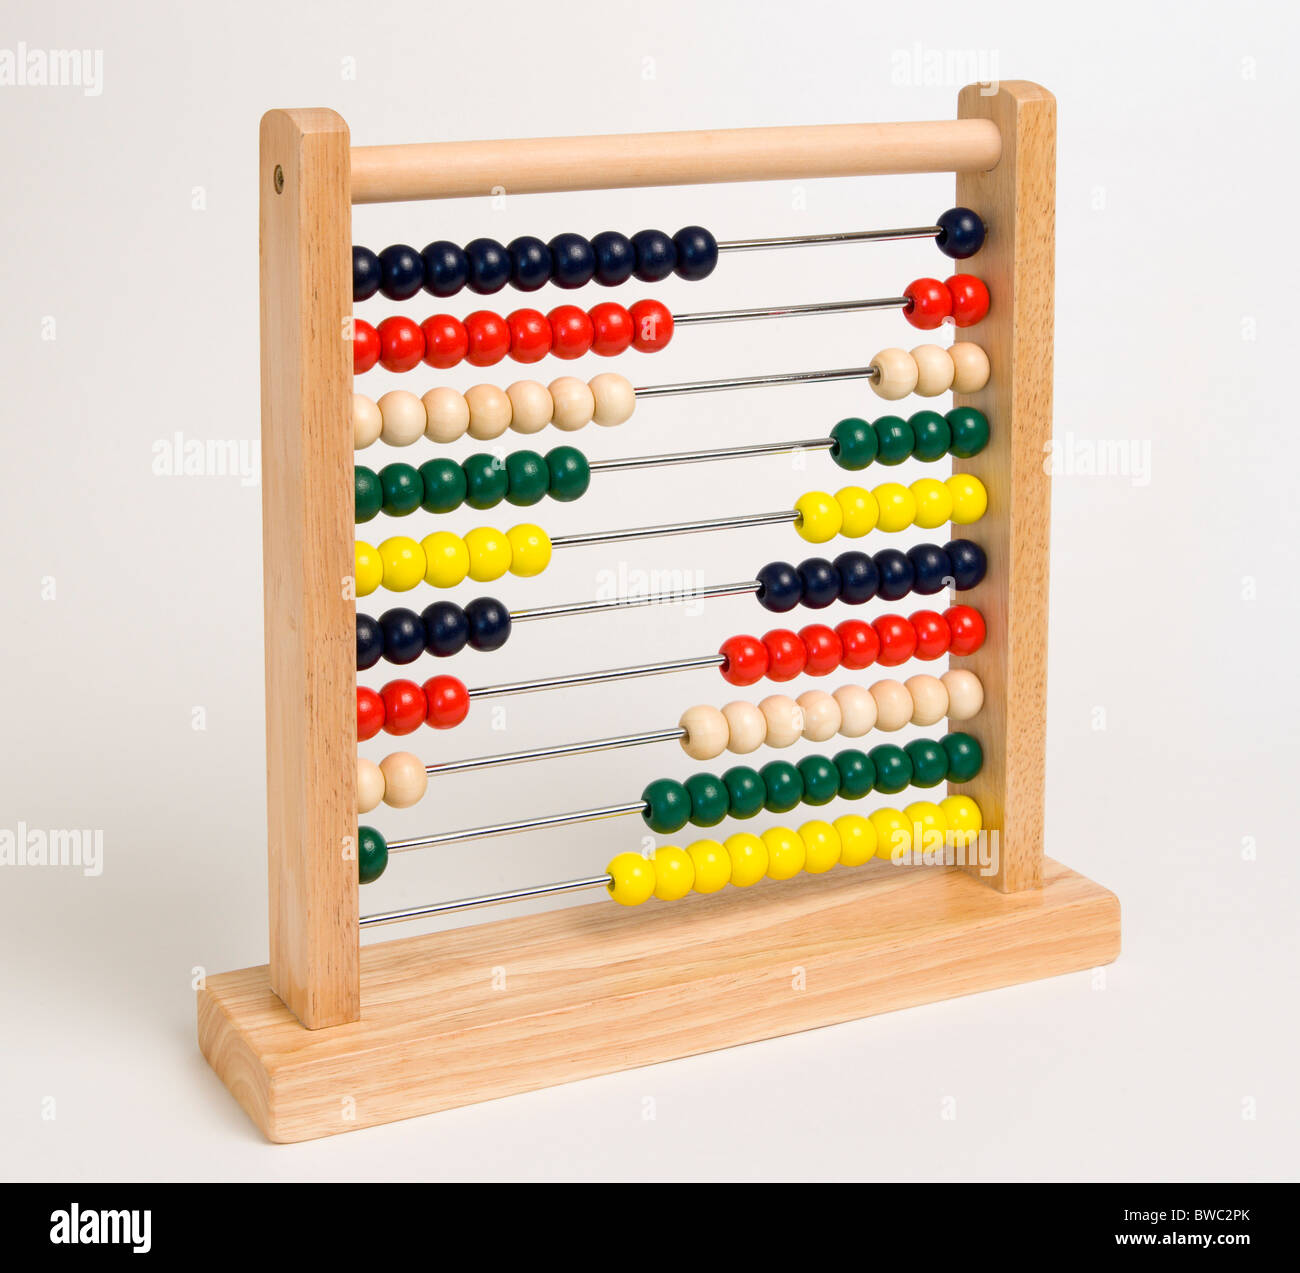 Education, School, Tools, Abacus or counting frame a calculating tool used primarily in parts of Asia Stock Photo